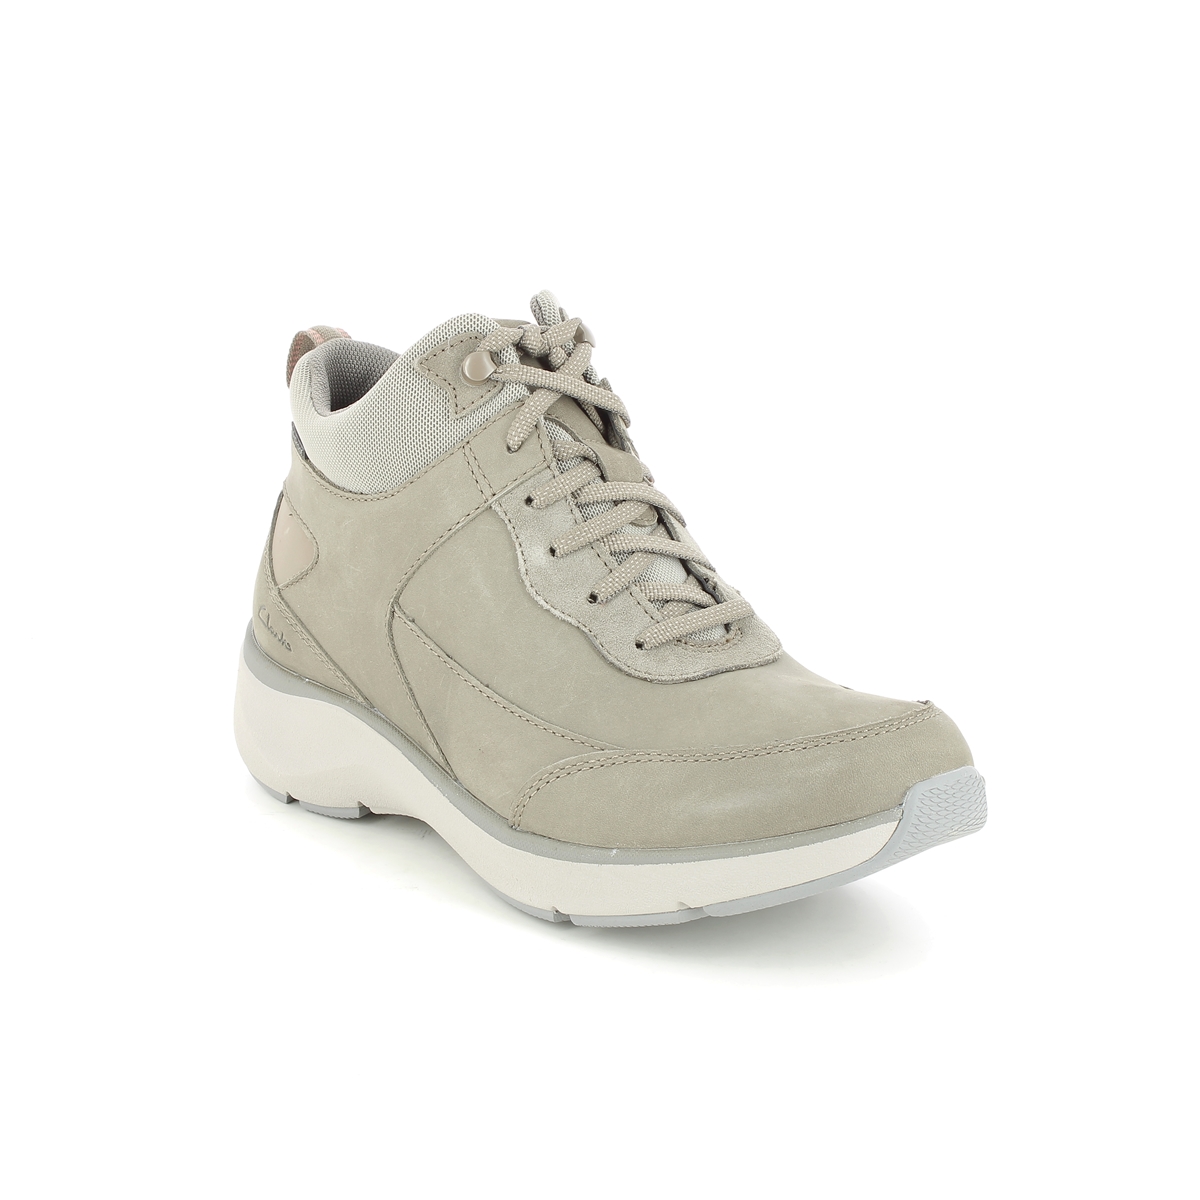 Clarks Wave 2 Mid Tex Taupe Nubuck Womens Walking Boots 536585E In Size 6.5 In Plain Taupe Nubuck E Width Fitting Narrow Fit